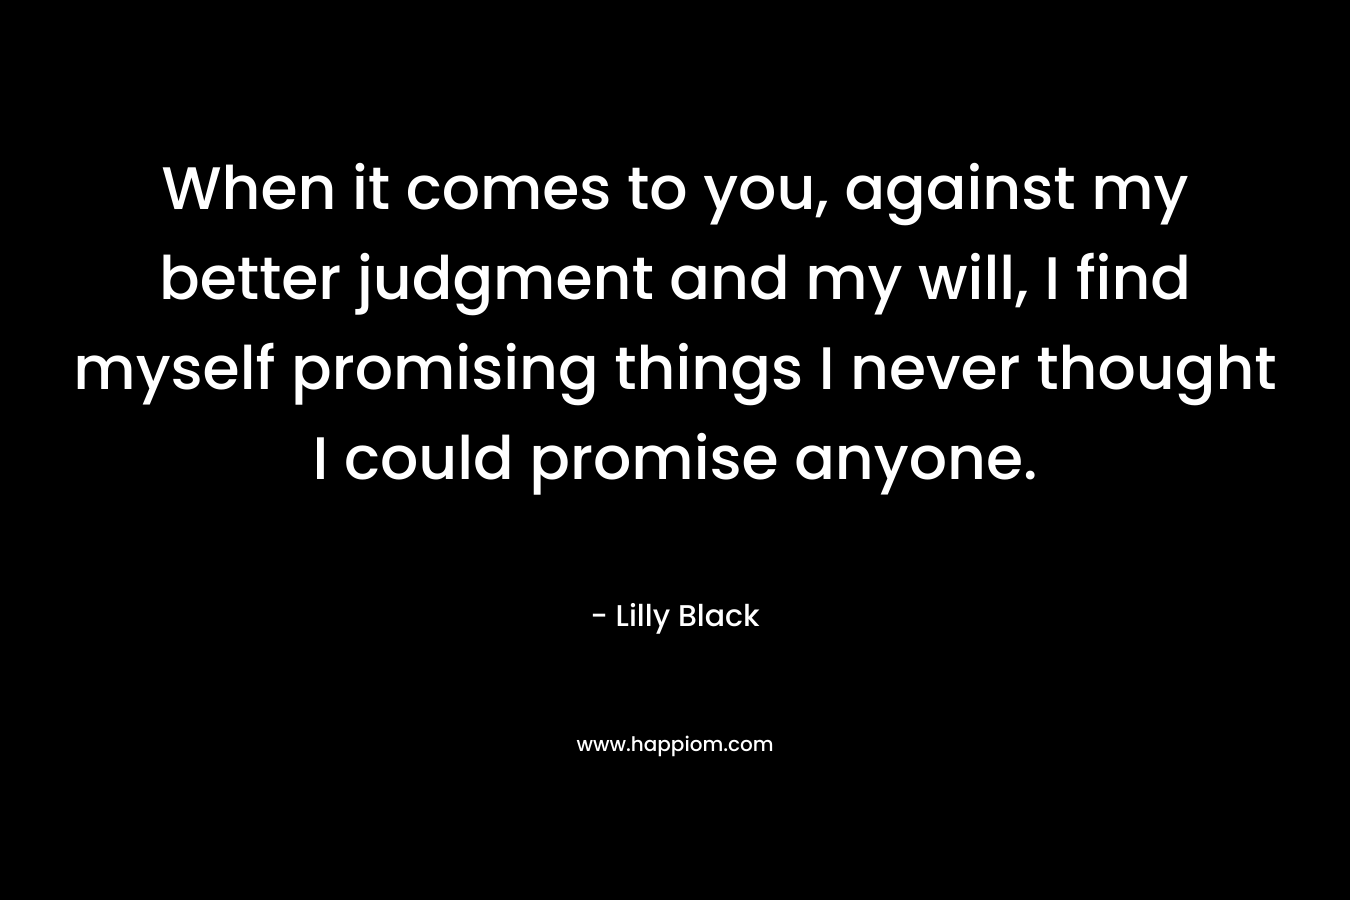 When it comes to you, against my better judgment and my will, I find myself promising things I never thought I could promise anyone. – Lilly Black